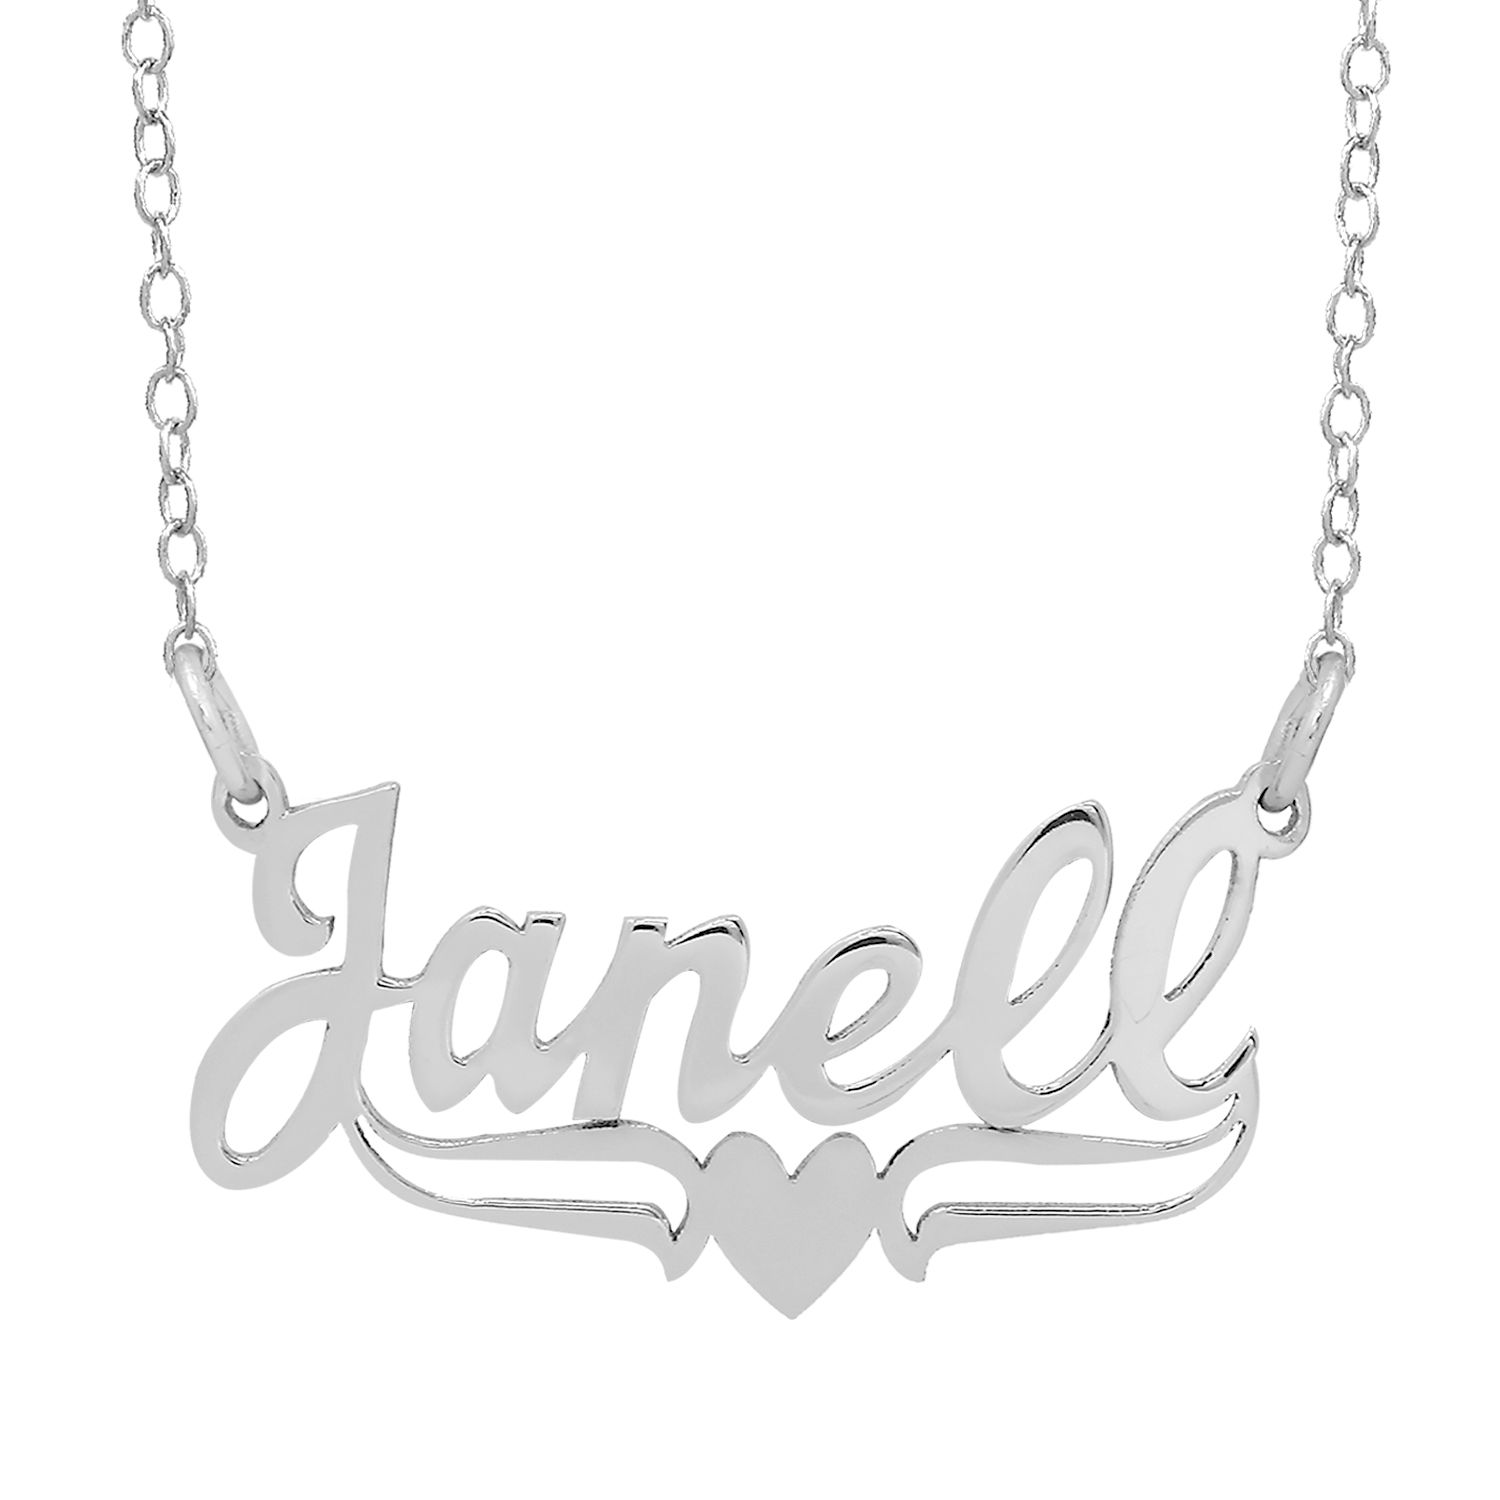 Fingerhut Jay Aimee Designs Sterling Silver Personalized Heart Name Necklace